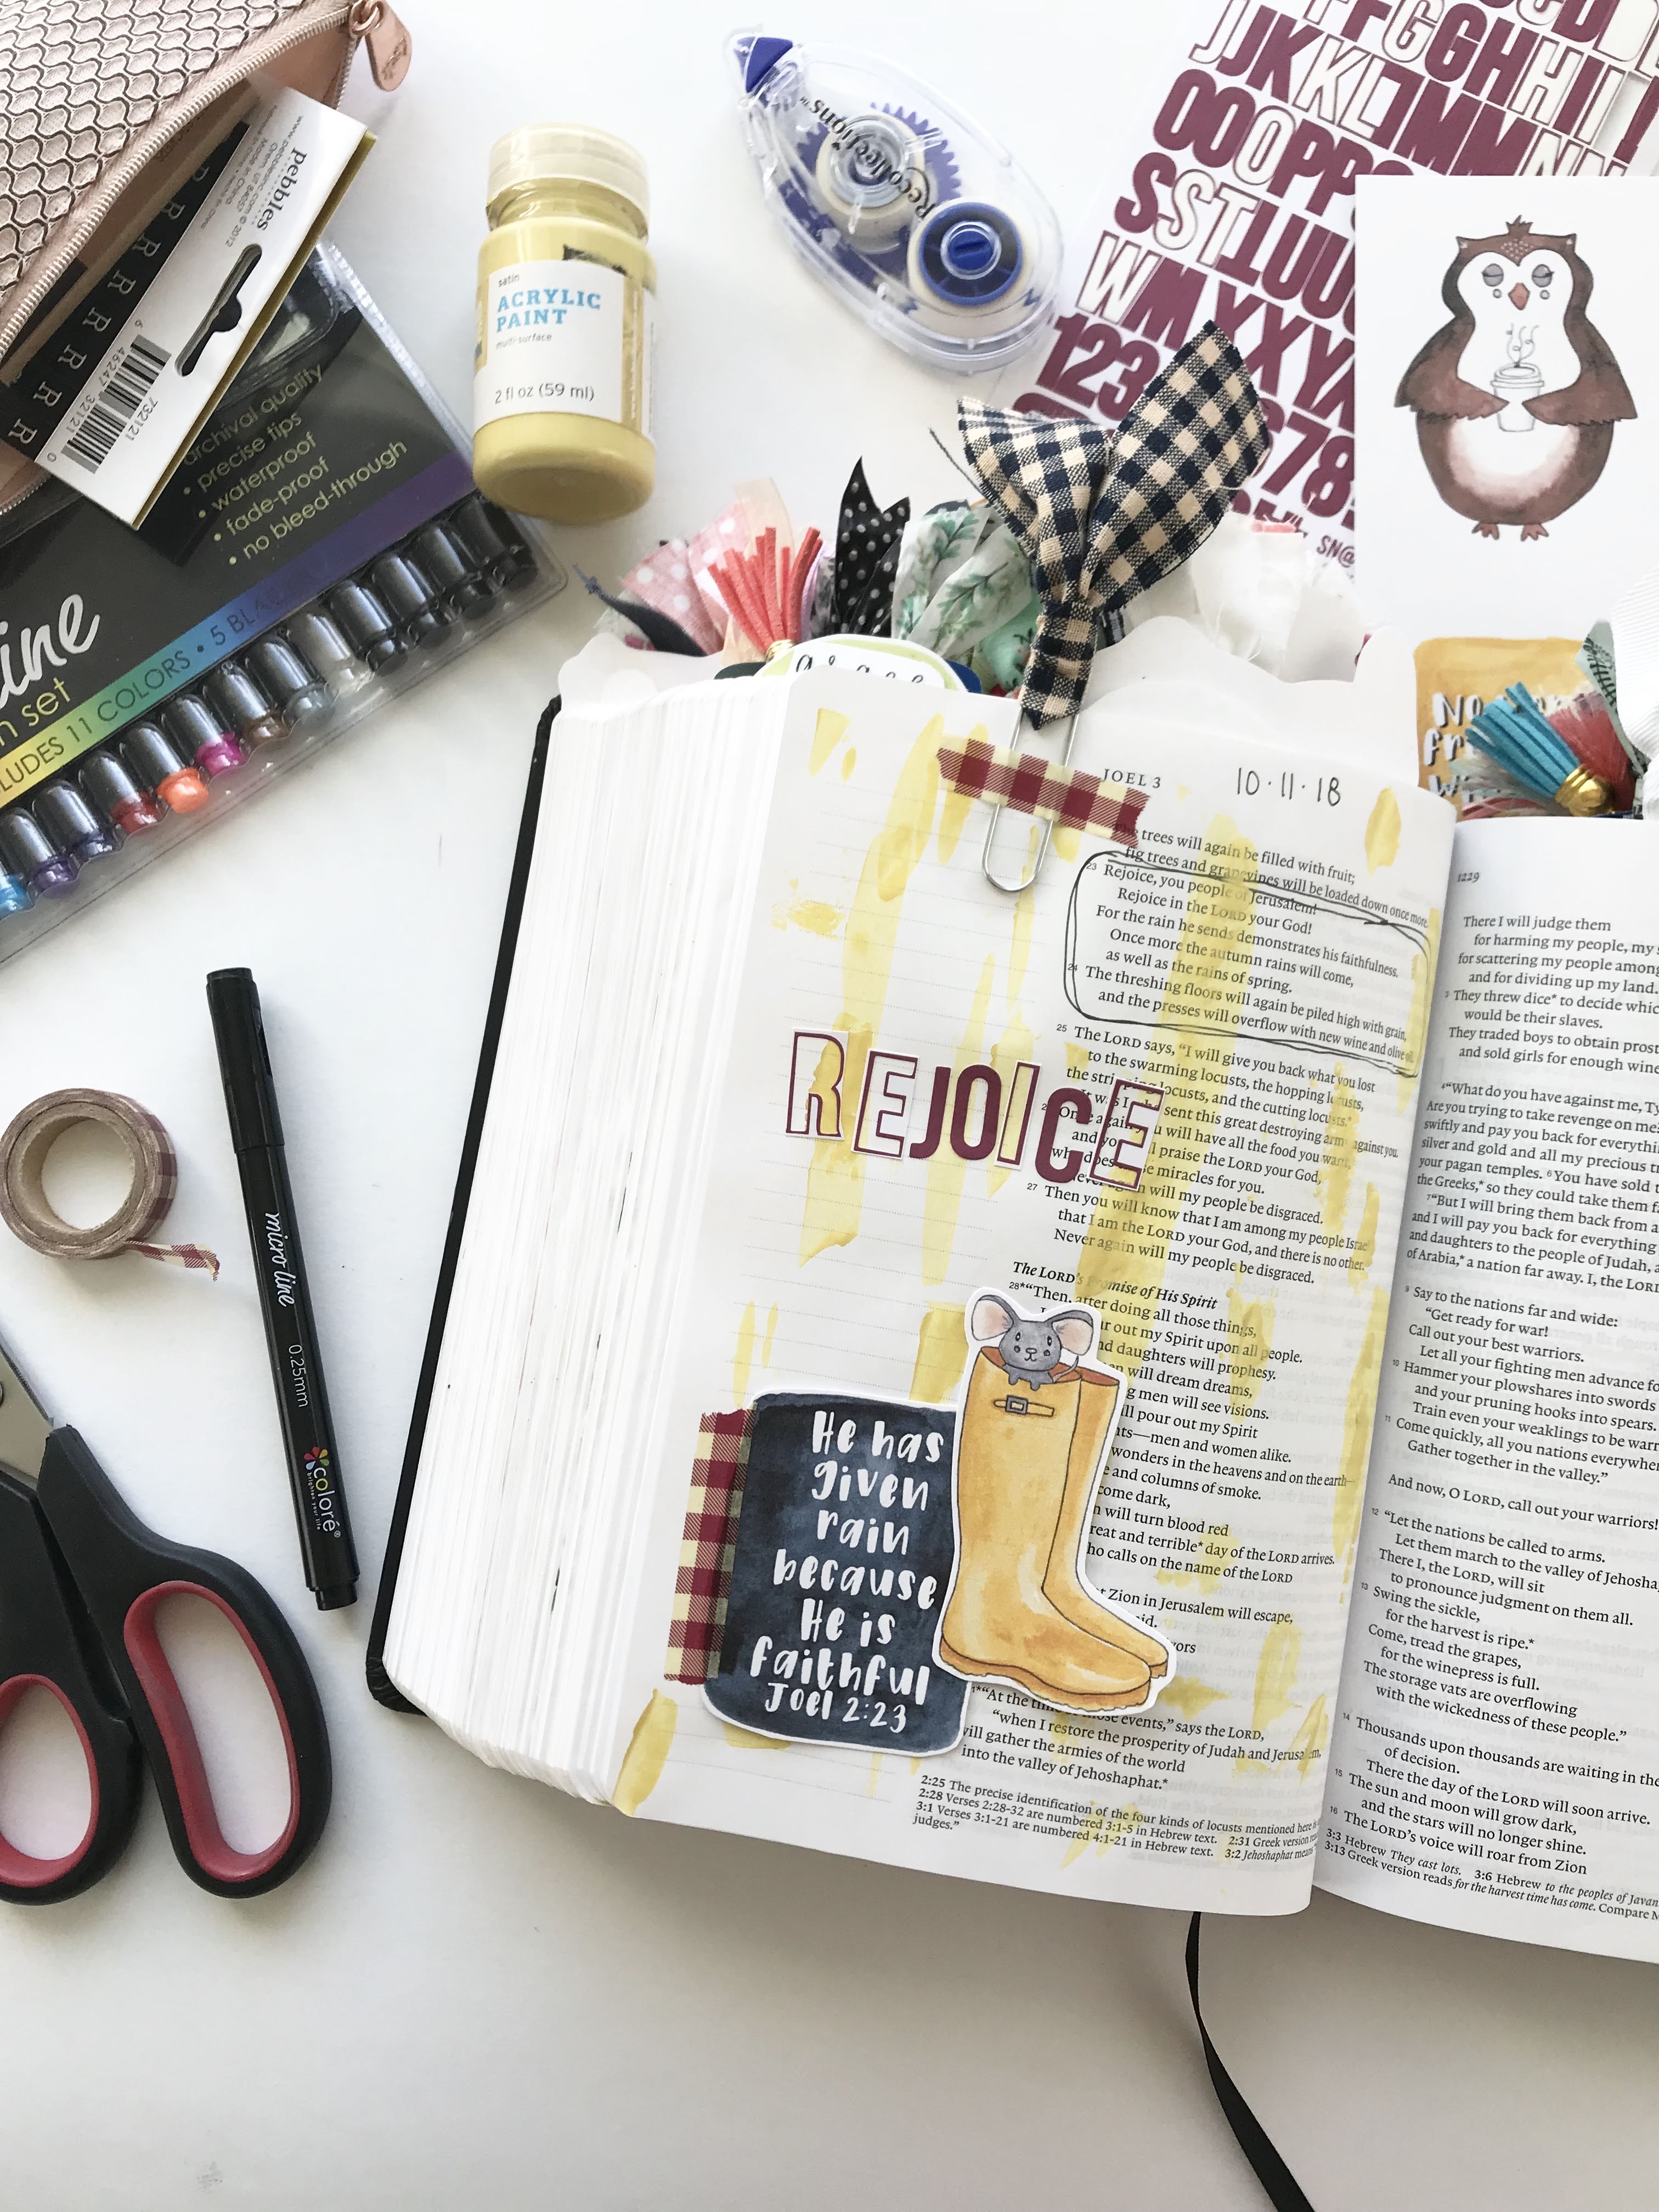 Bible journaling with acrylic paint, alpha stickers, washi tape, page clips, printables and pens.